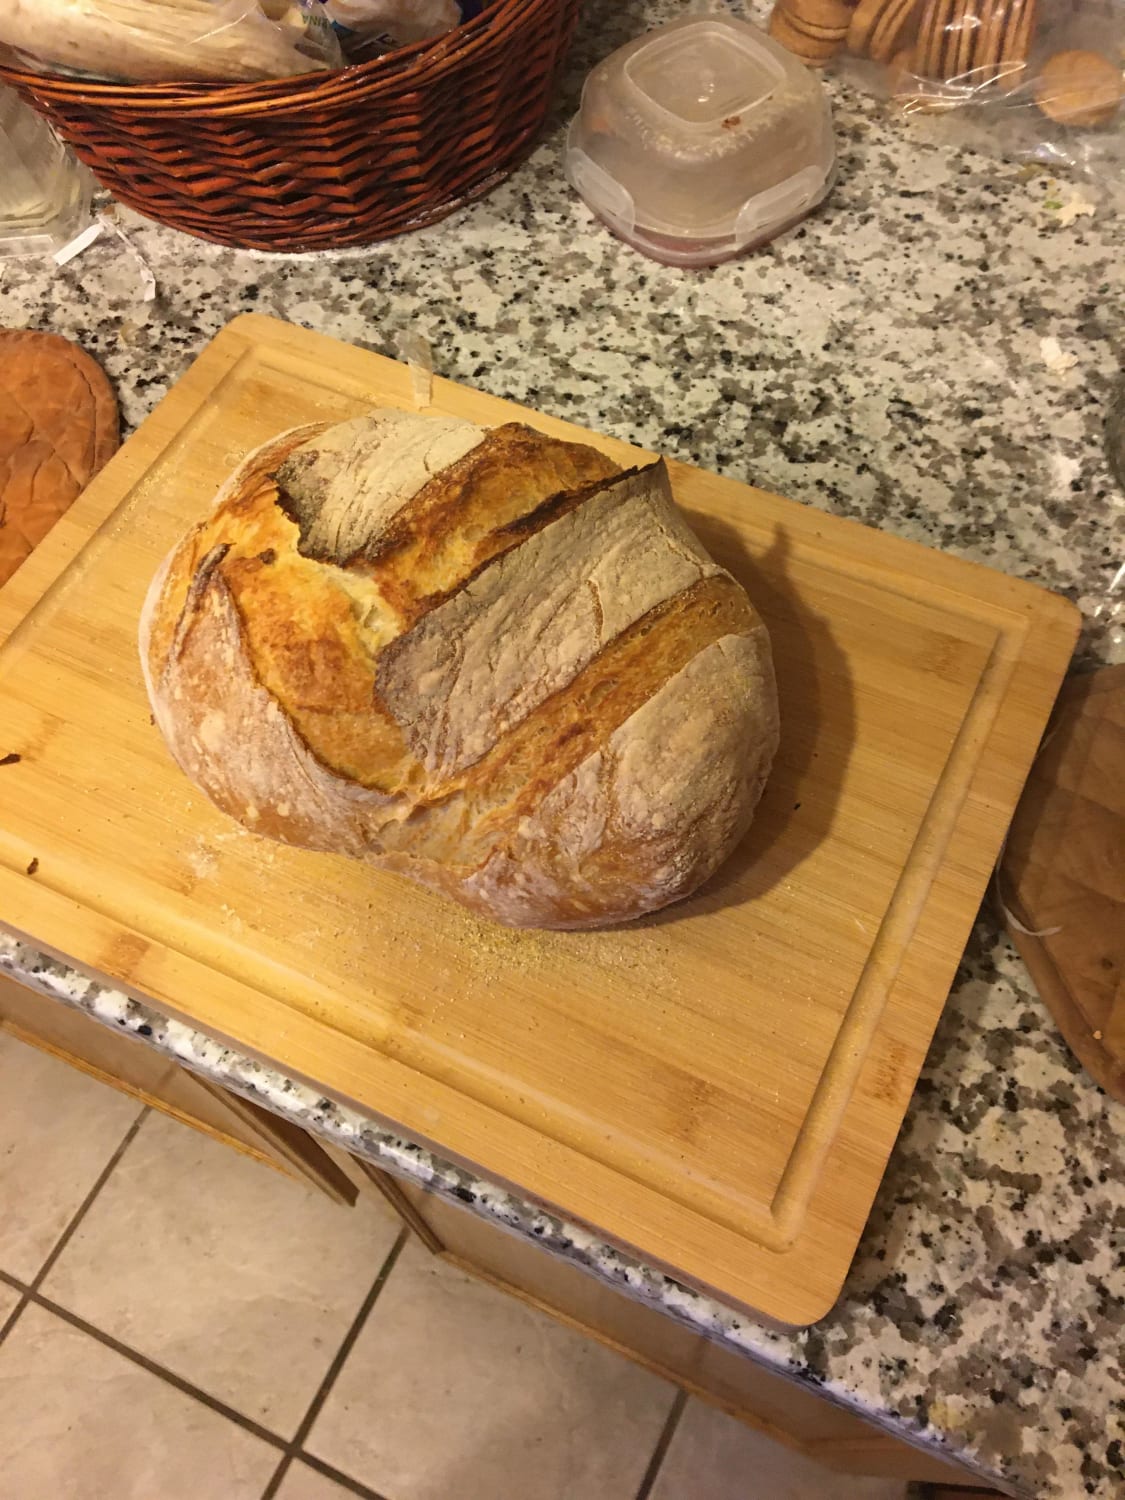 Terrible at photography but I made a rustic loaf I’m pretty happy with